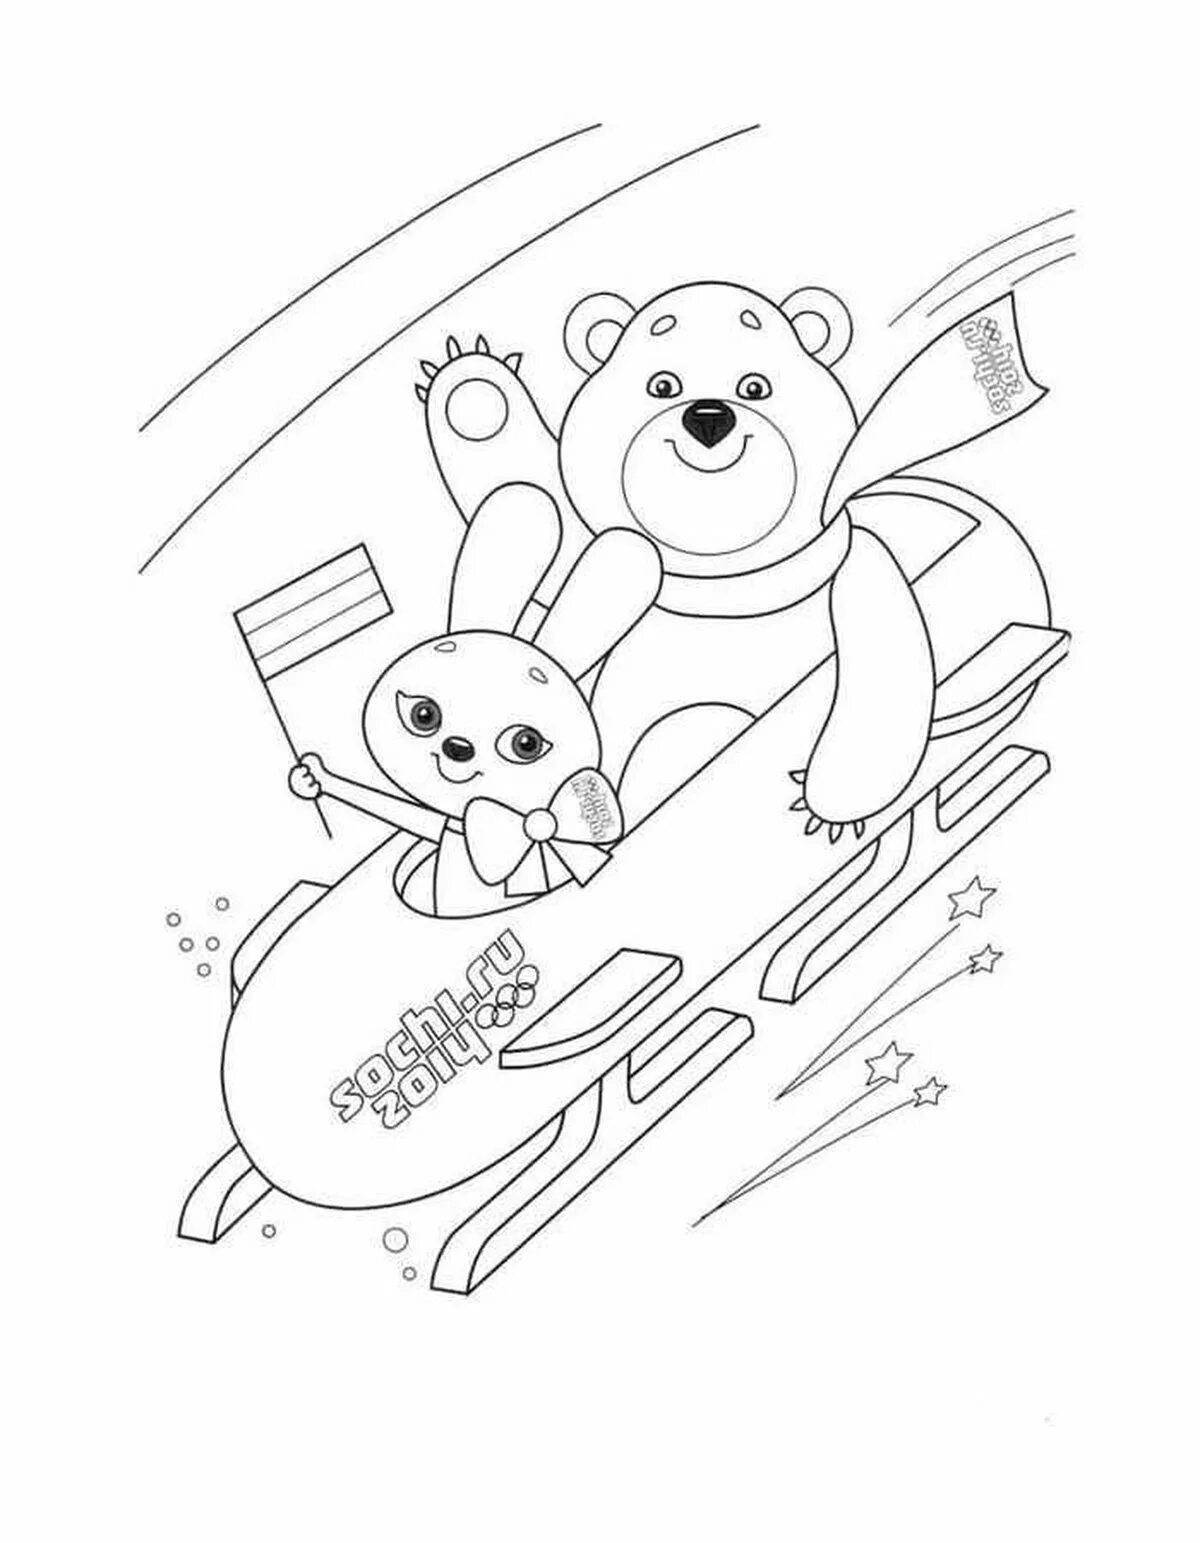 Glowing winter sports coloring page